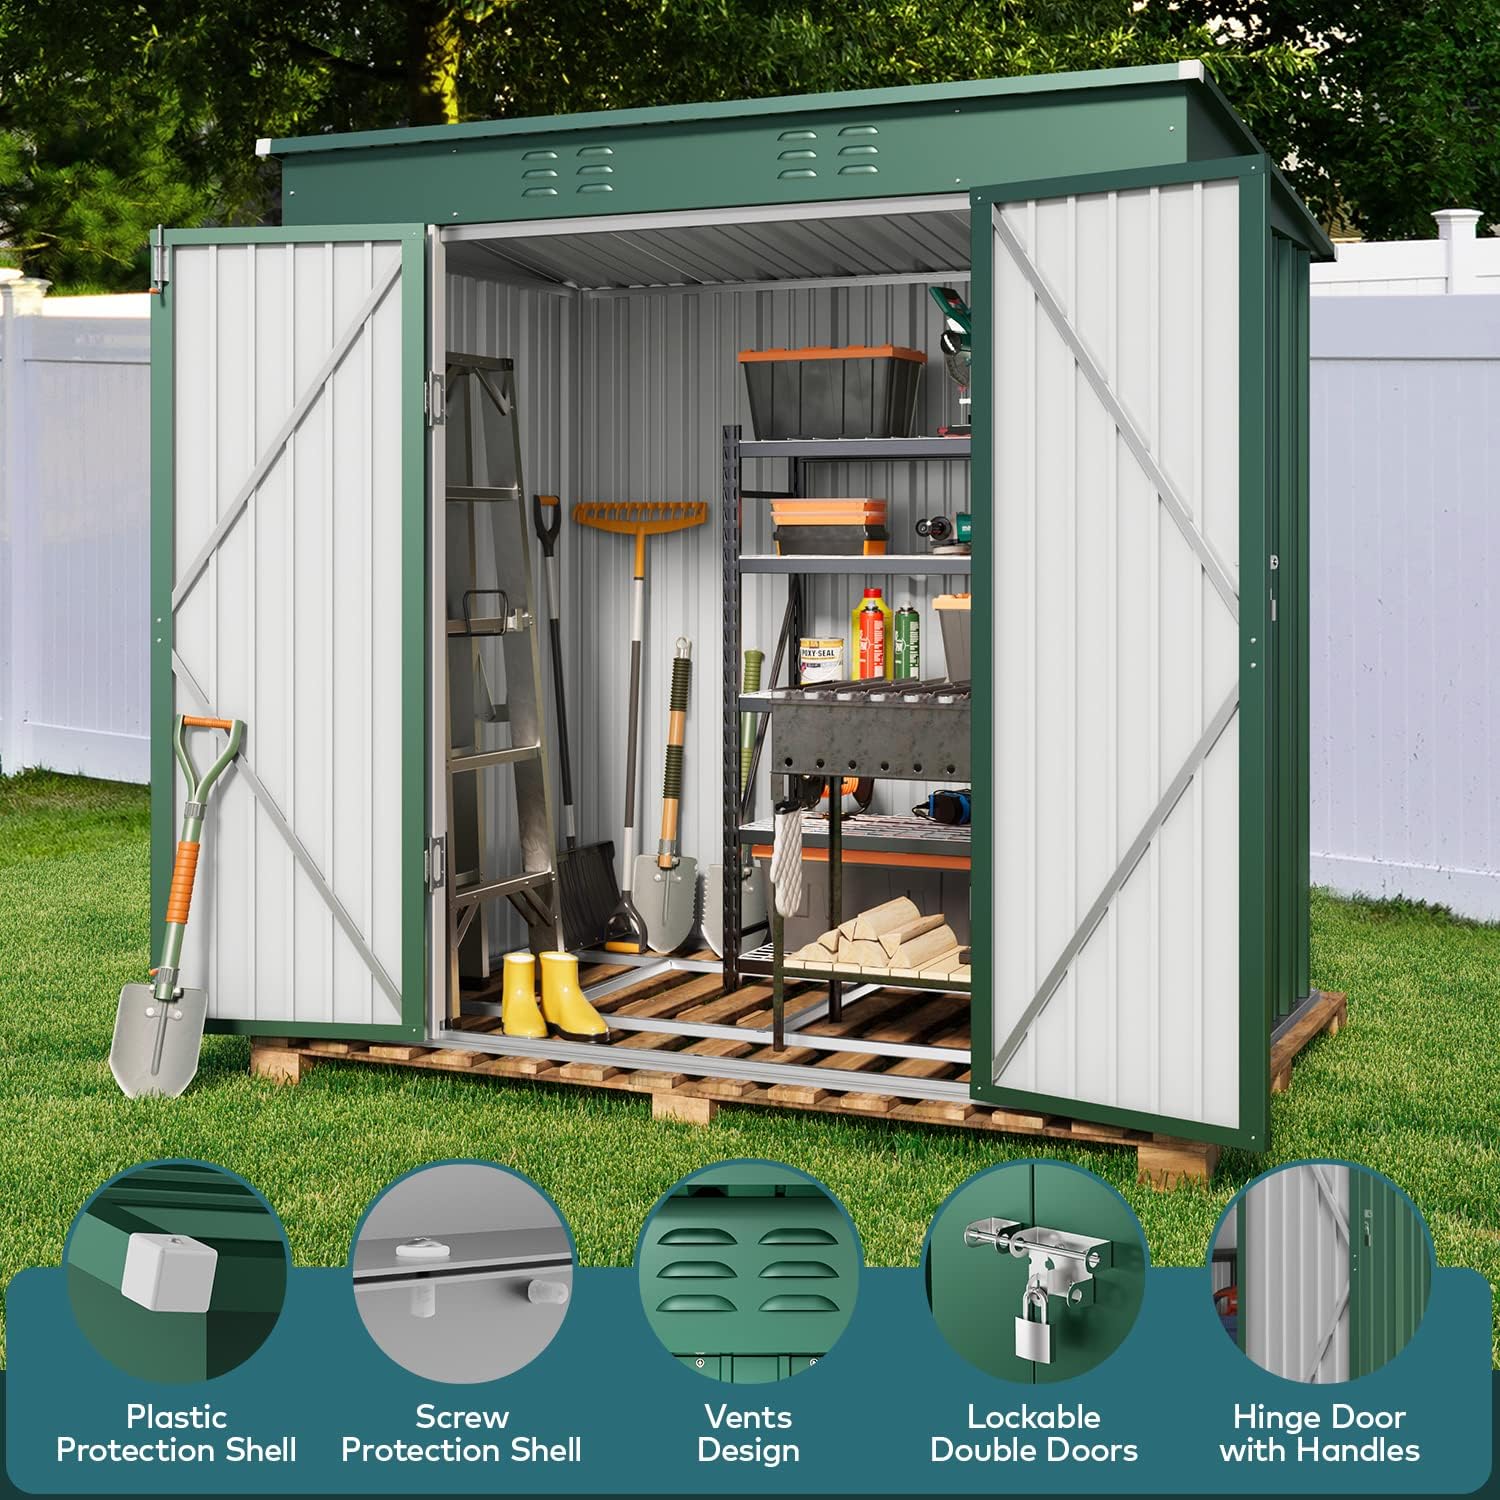 Outdoor Storage Shed, 6' x 4' Outdoor Storage Shed Clearance for Backyard Patio Lawn, Waterproof Metal Shed Outdoor Storage with Double Lockable Doors and Base Frame, Green - image 4 of 8